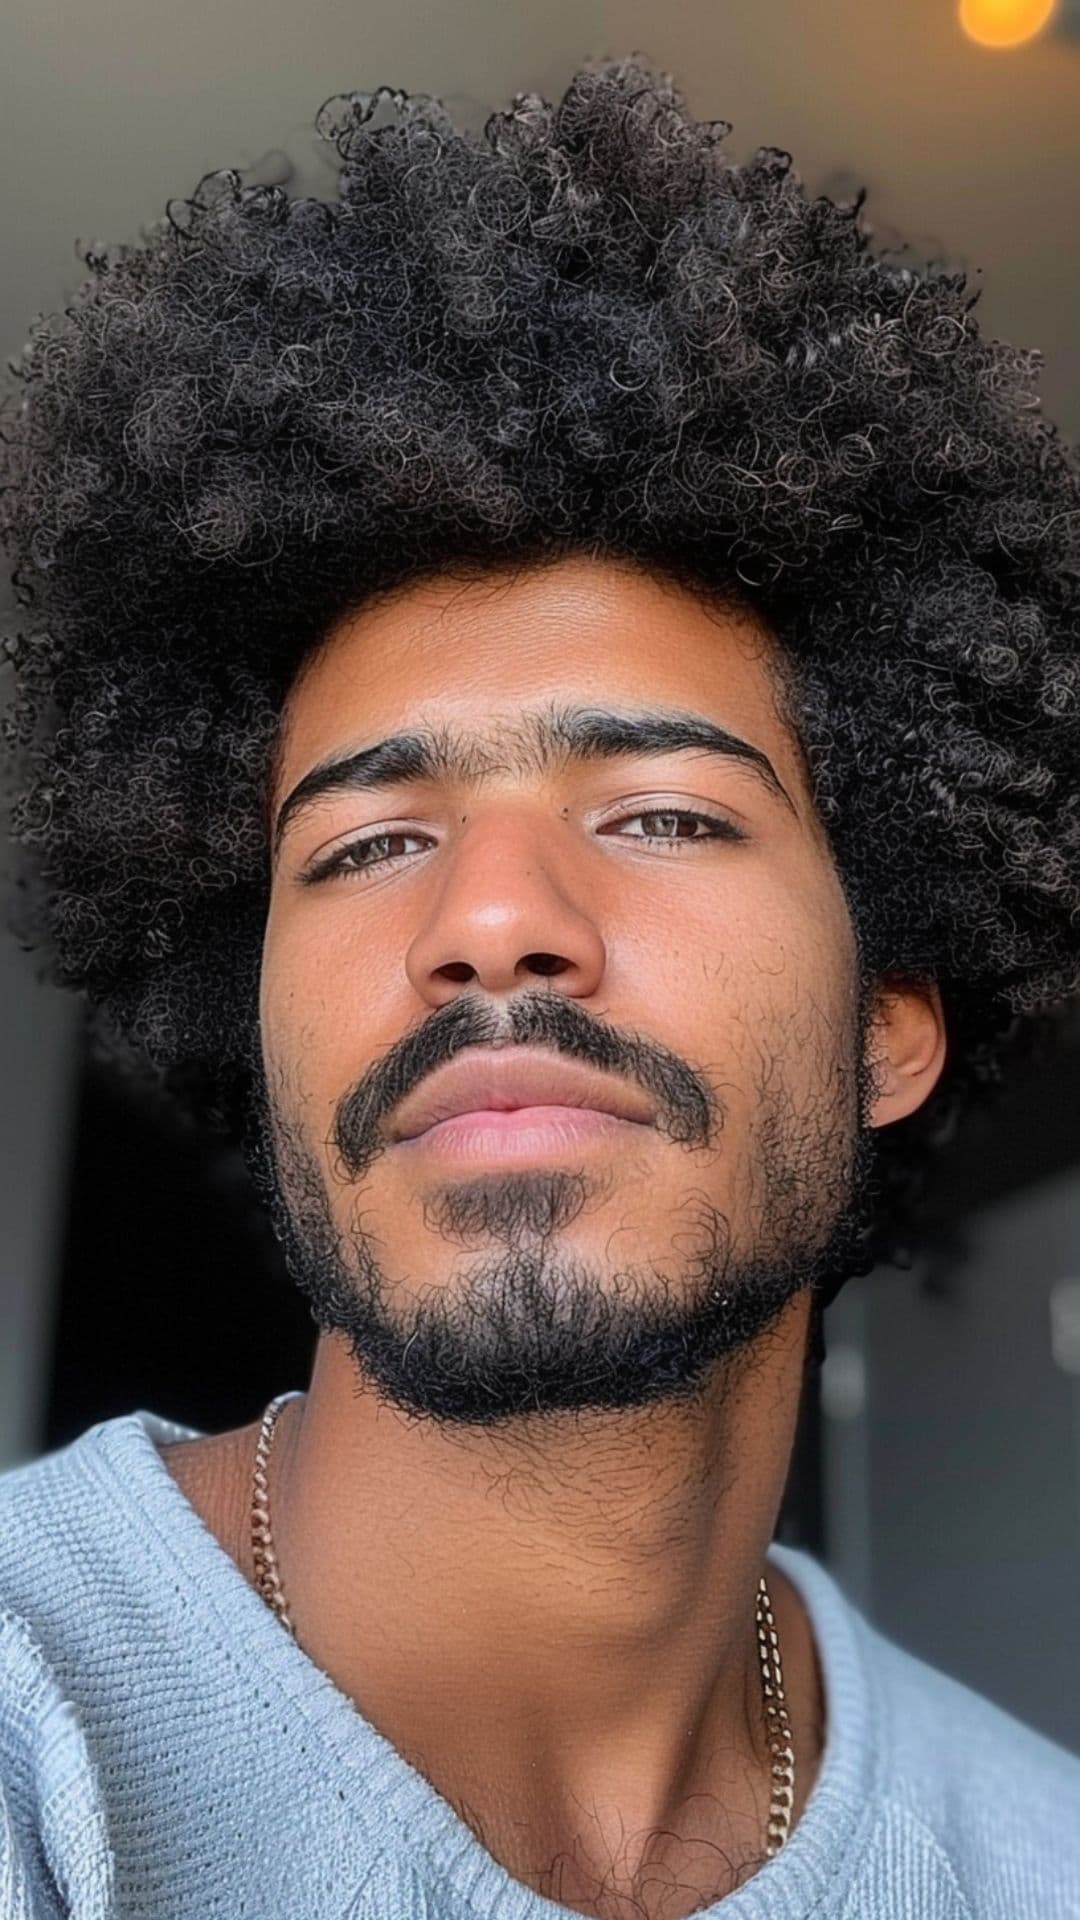 A black man modelling a curly Afro hairstyle.